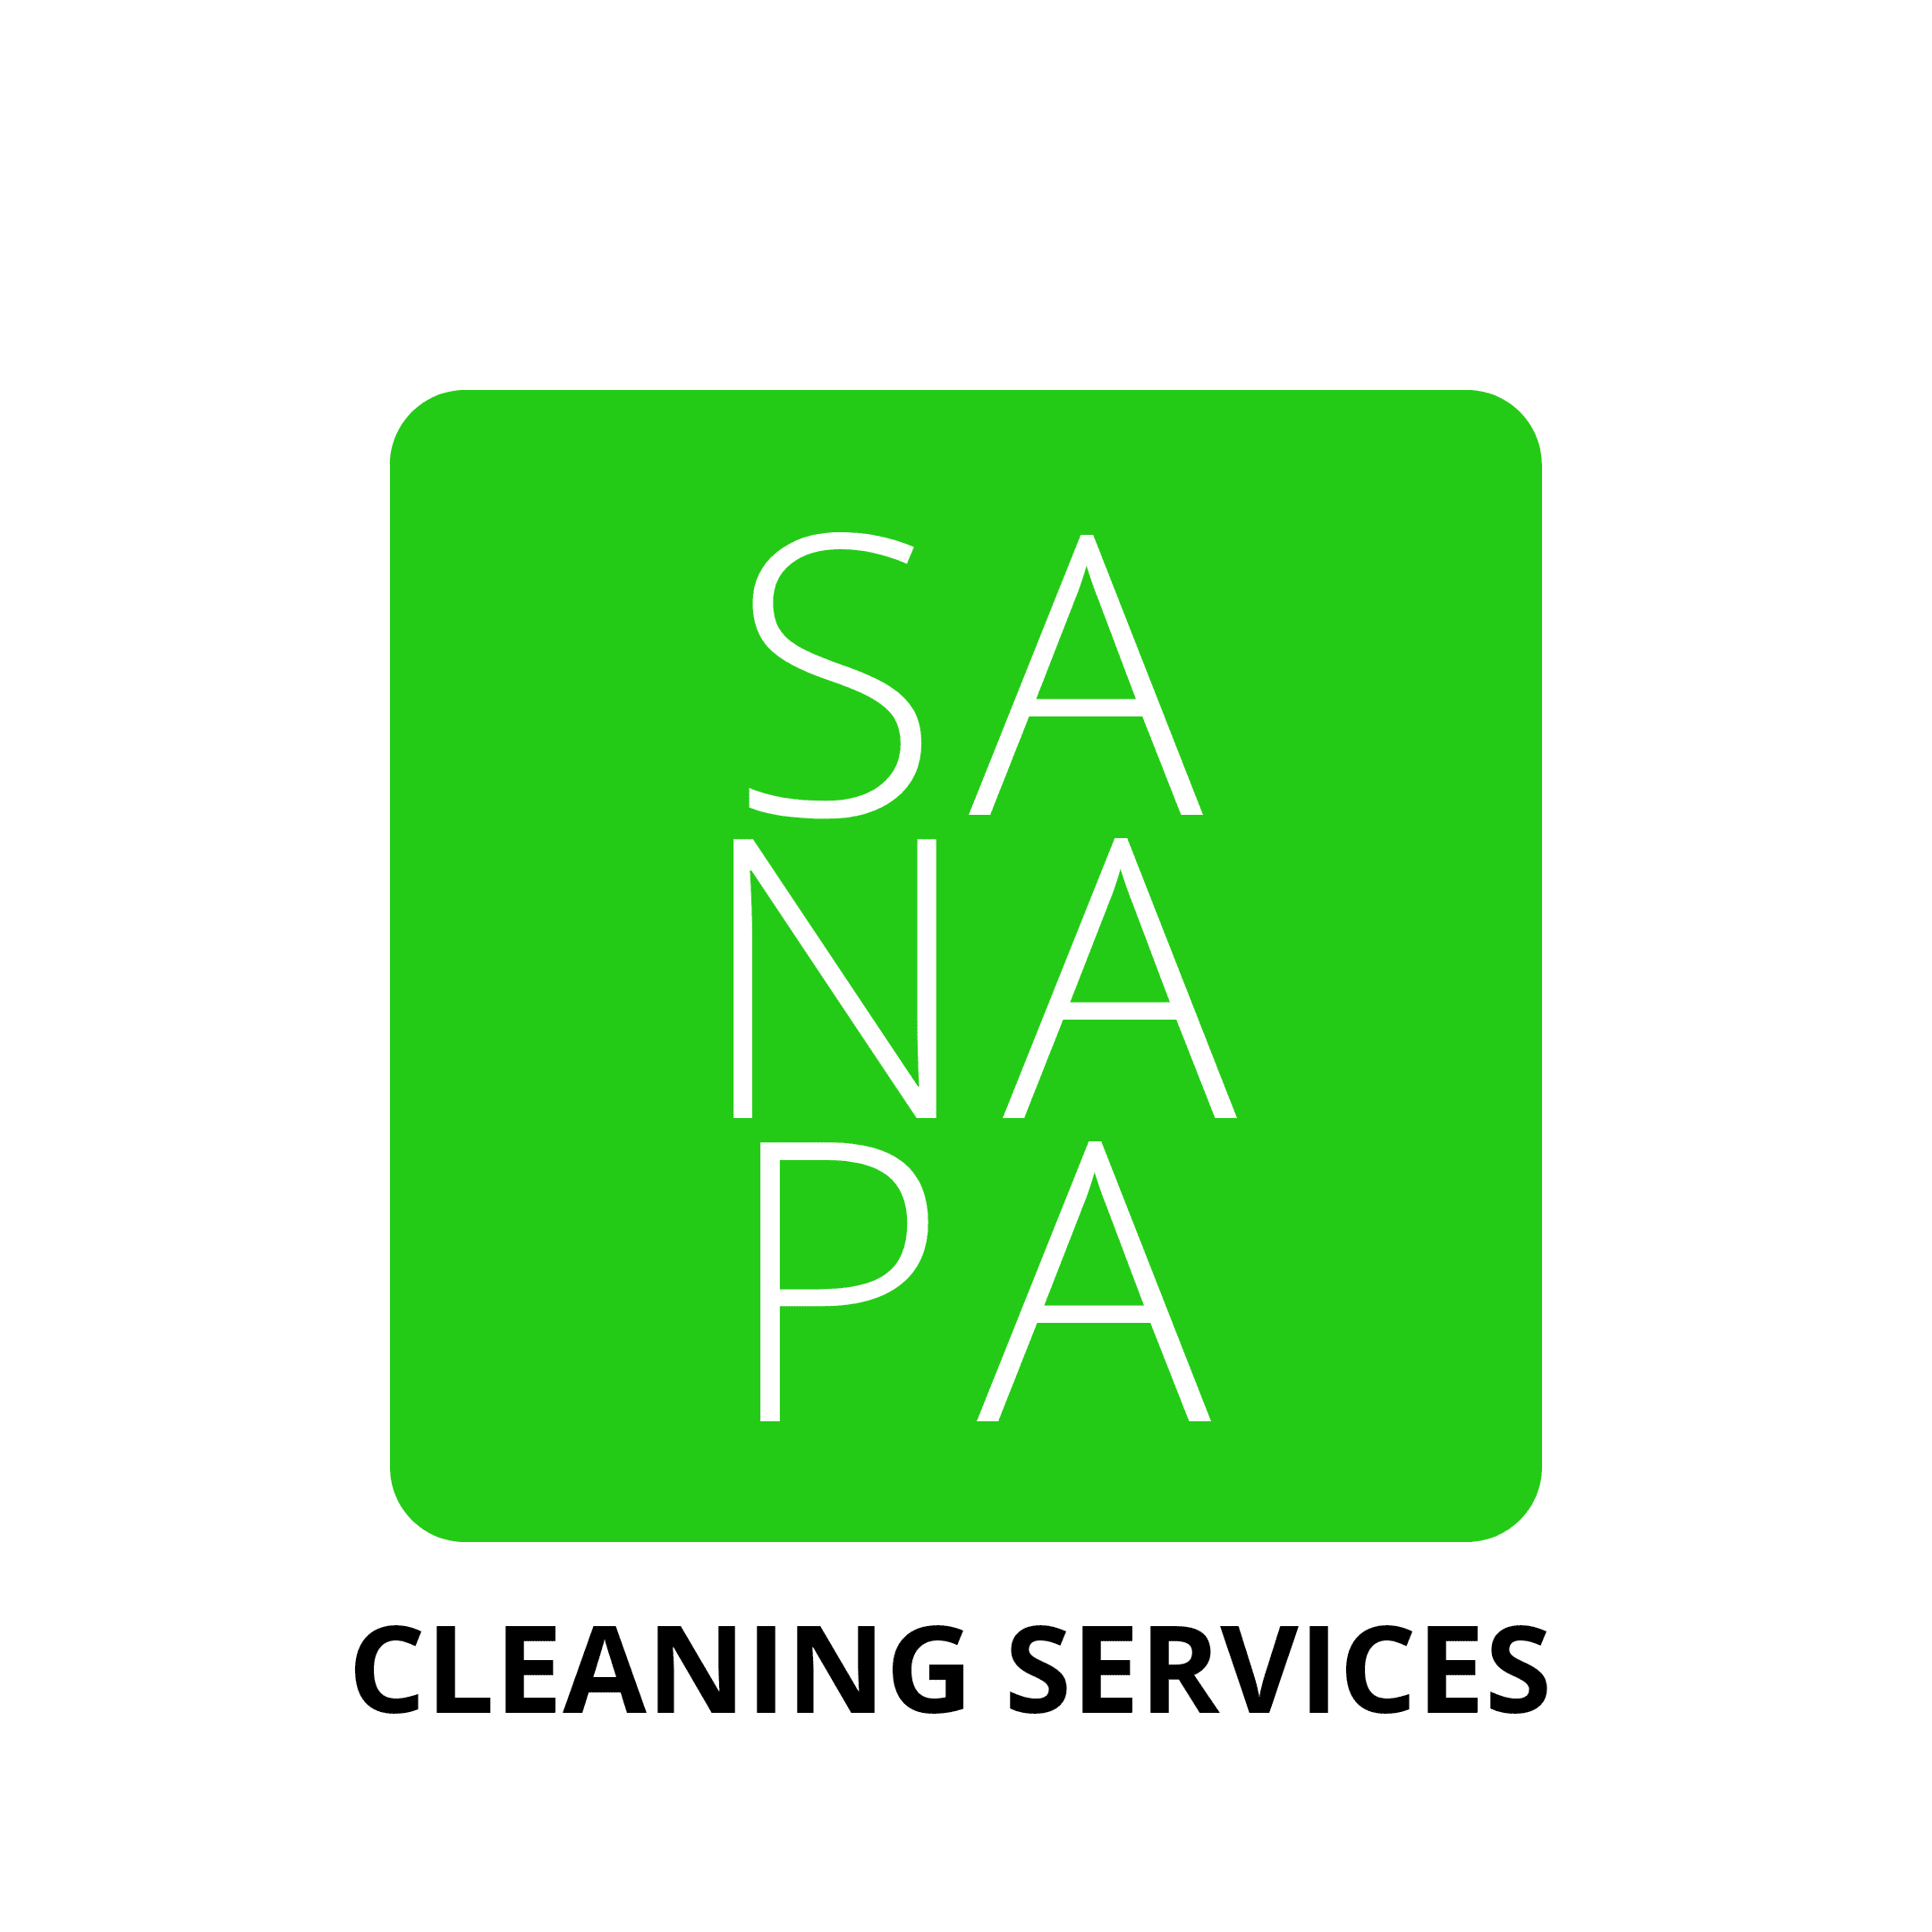 Sanapa Cleaning Services